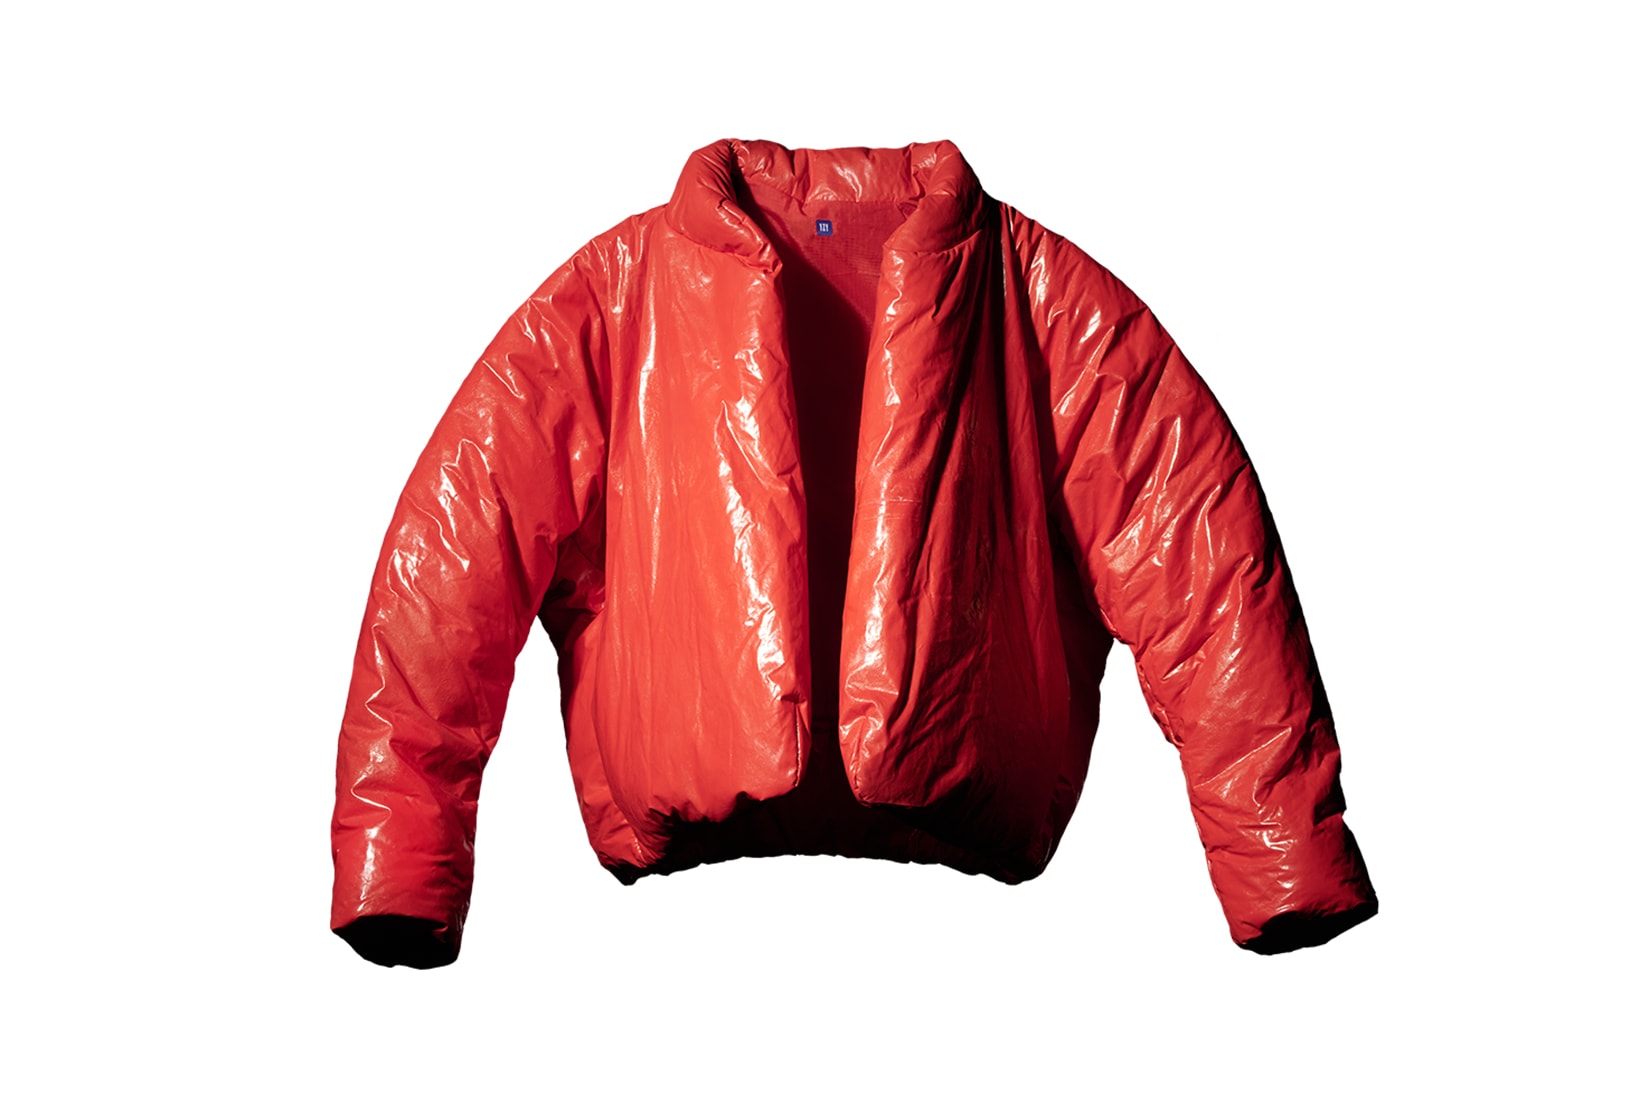 Kanye West YEEZY Gap Red Round Jacket Collaboration Outerwear